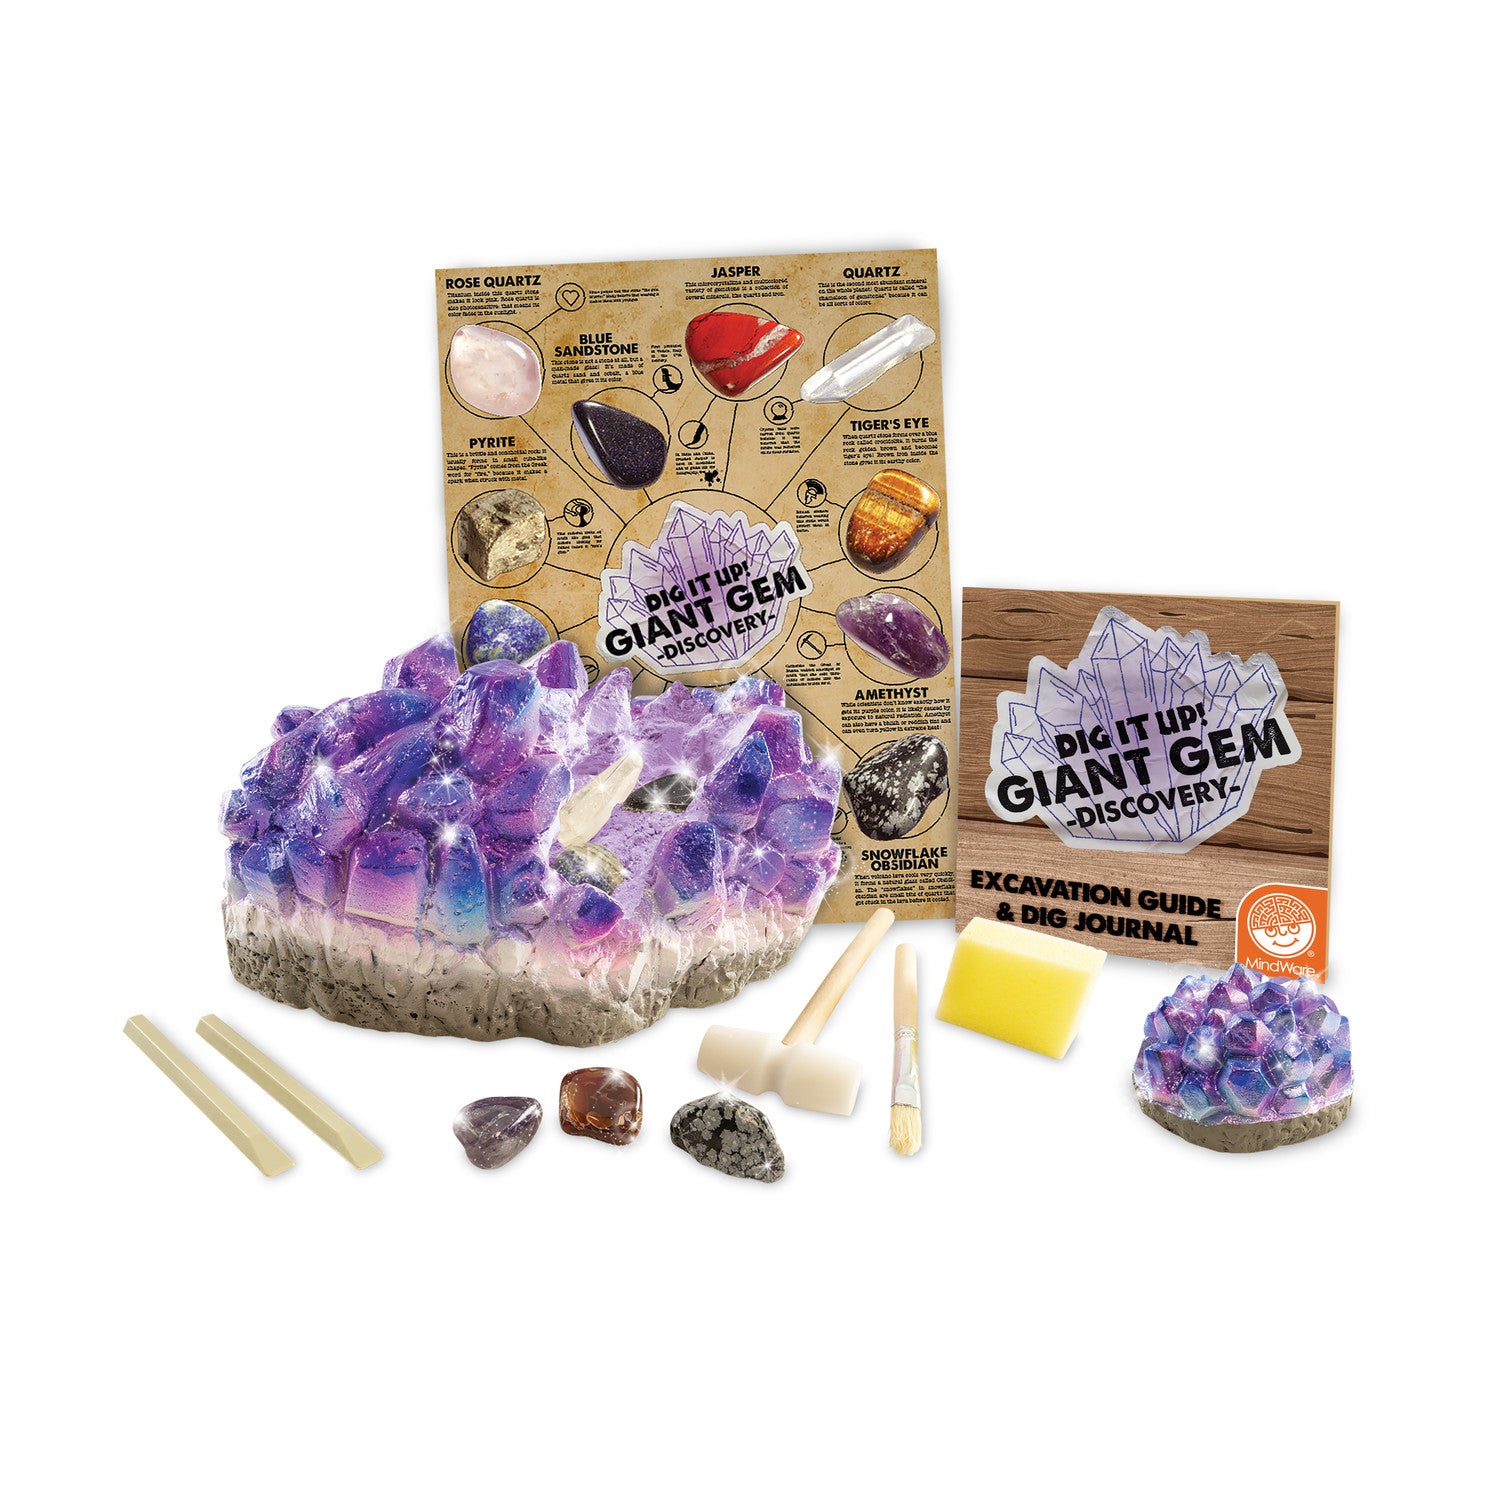 Giant Gem Discovery Kit